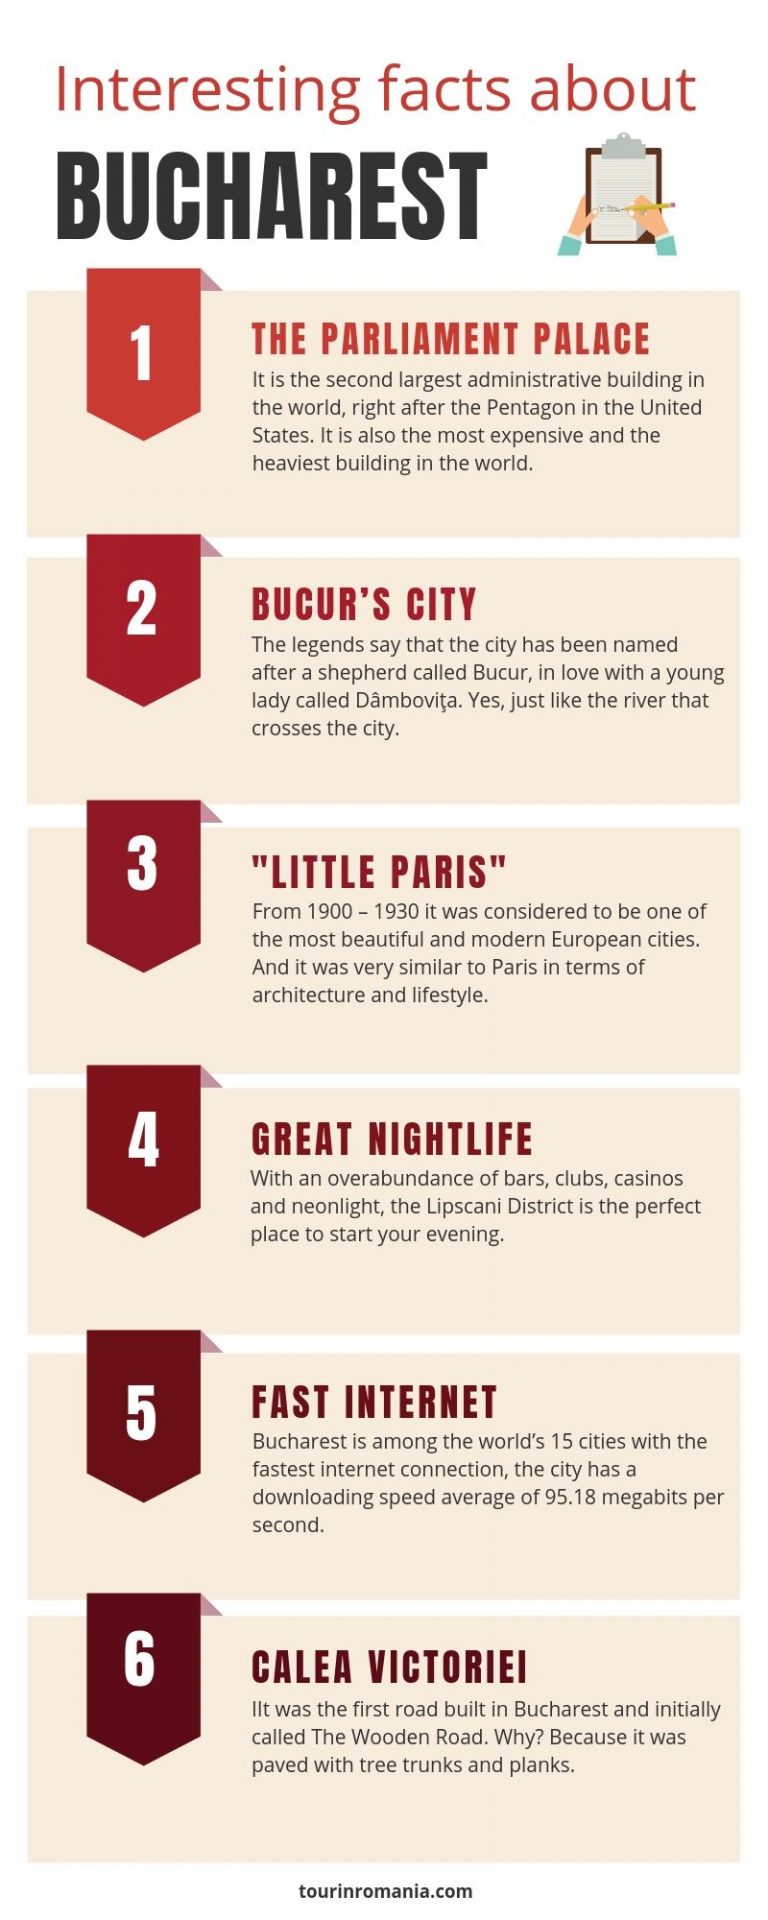 Interesting facts about Bucharest